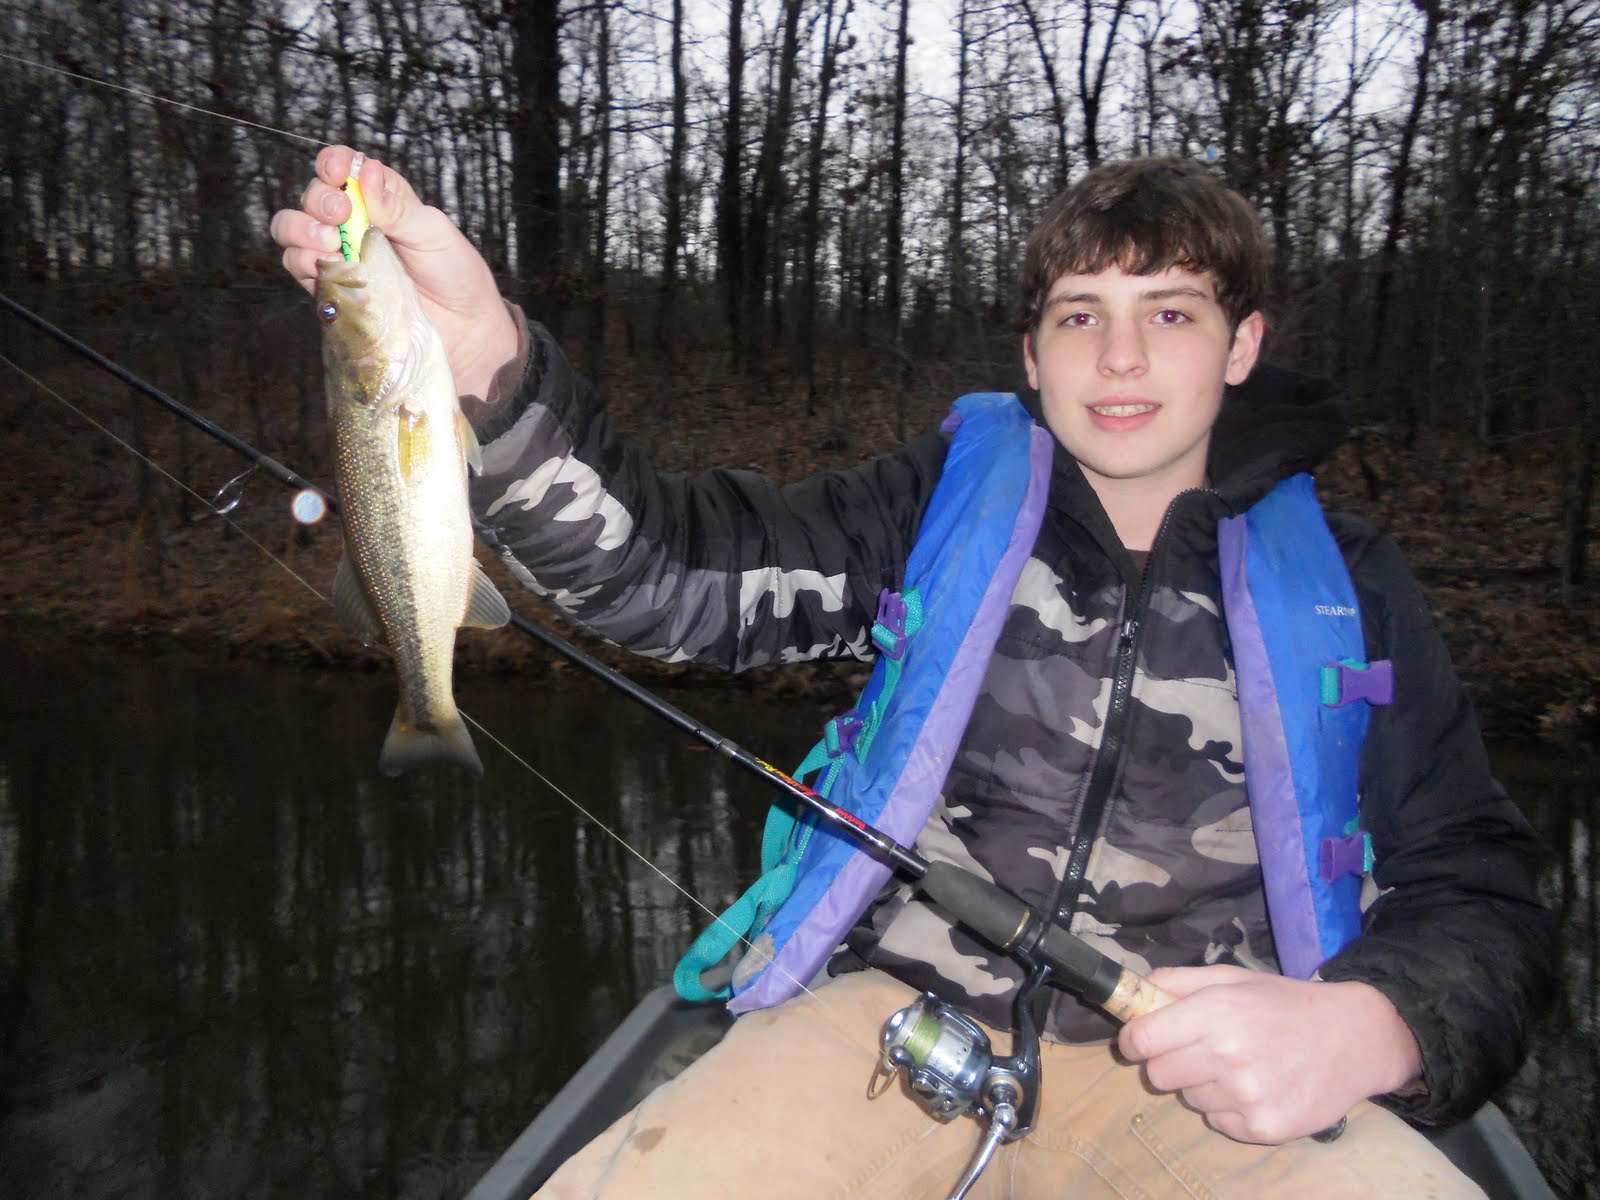 One-Eyed Hillbilly Outdoors: A Priceless Weekend Fishin' with the Family